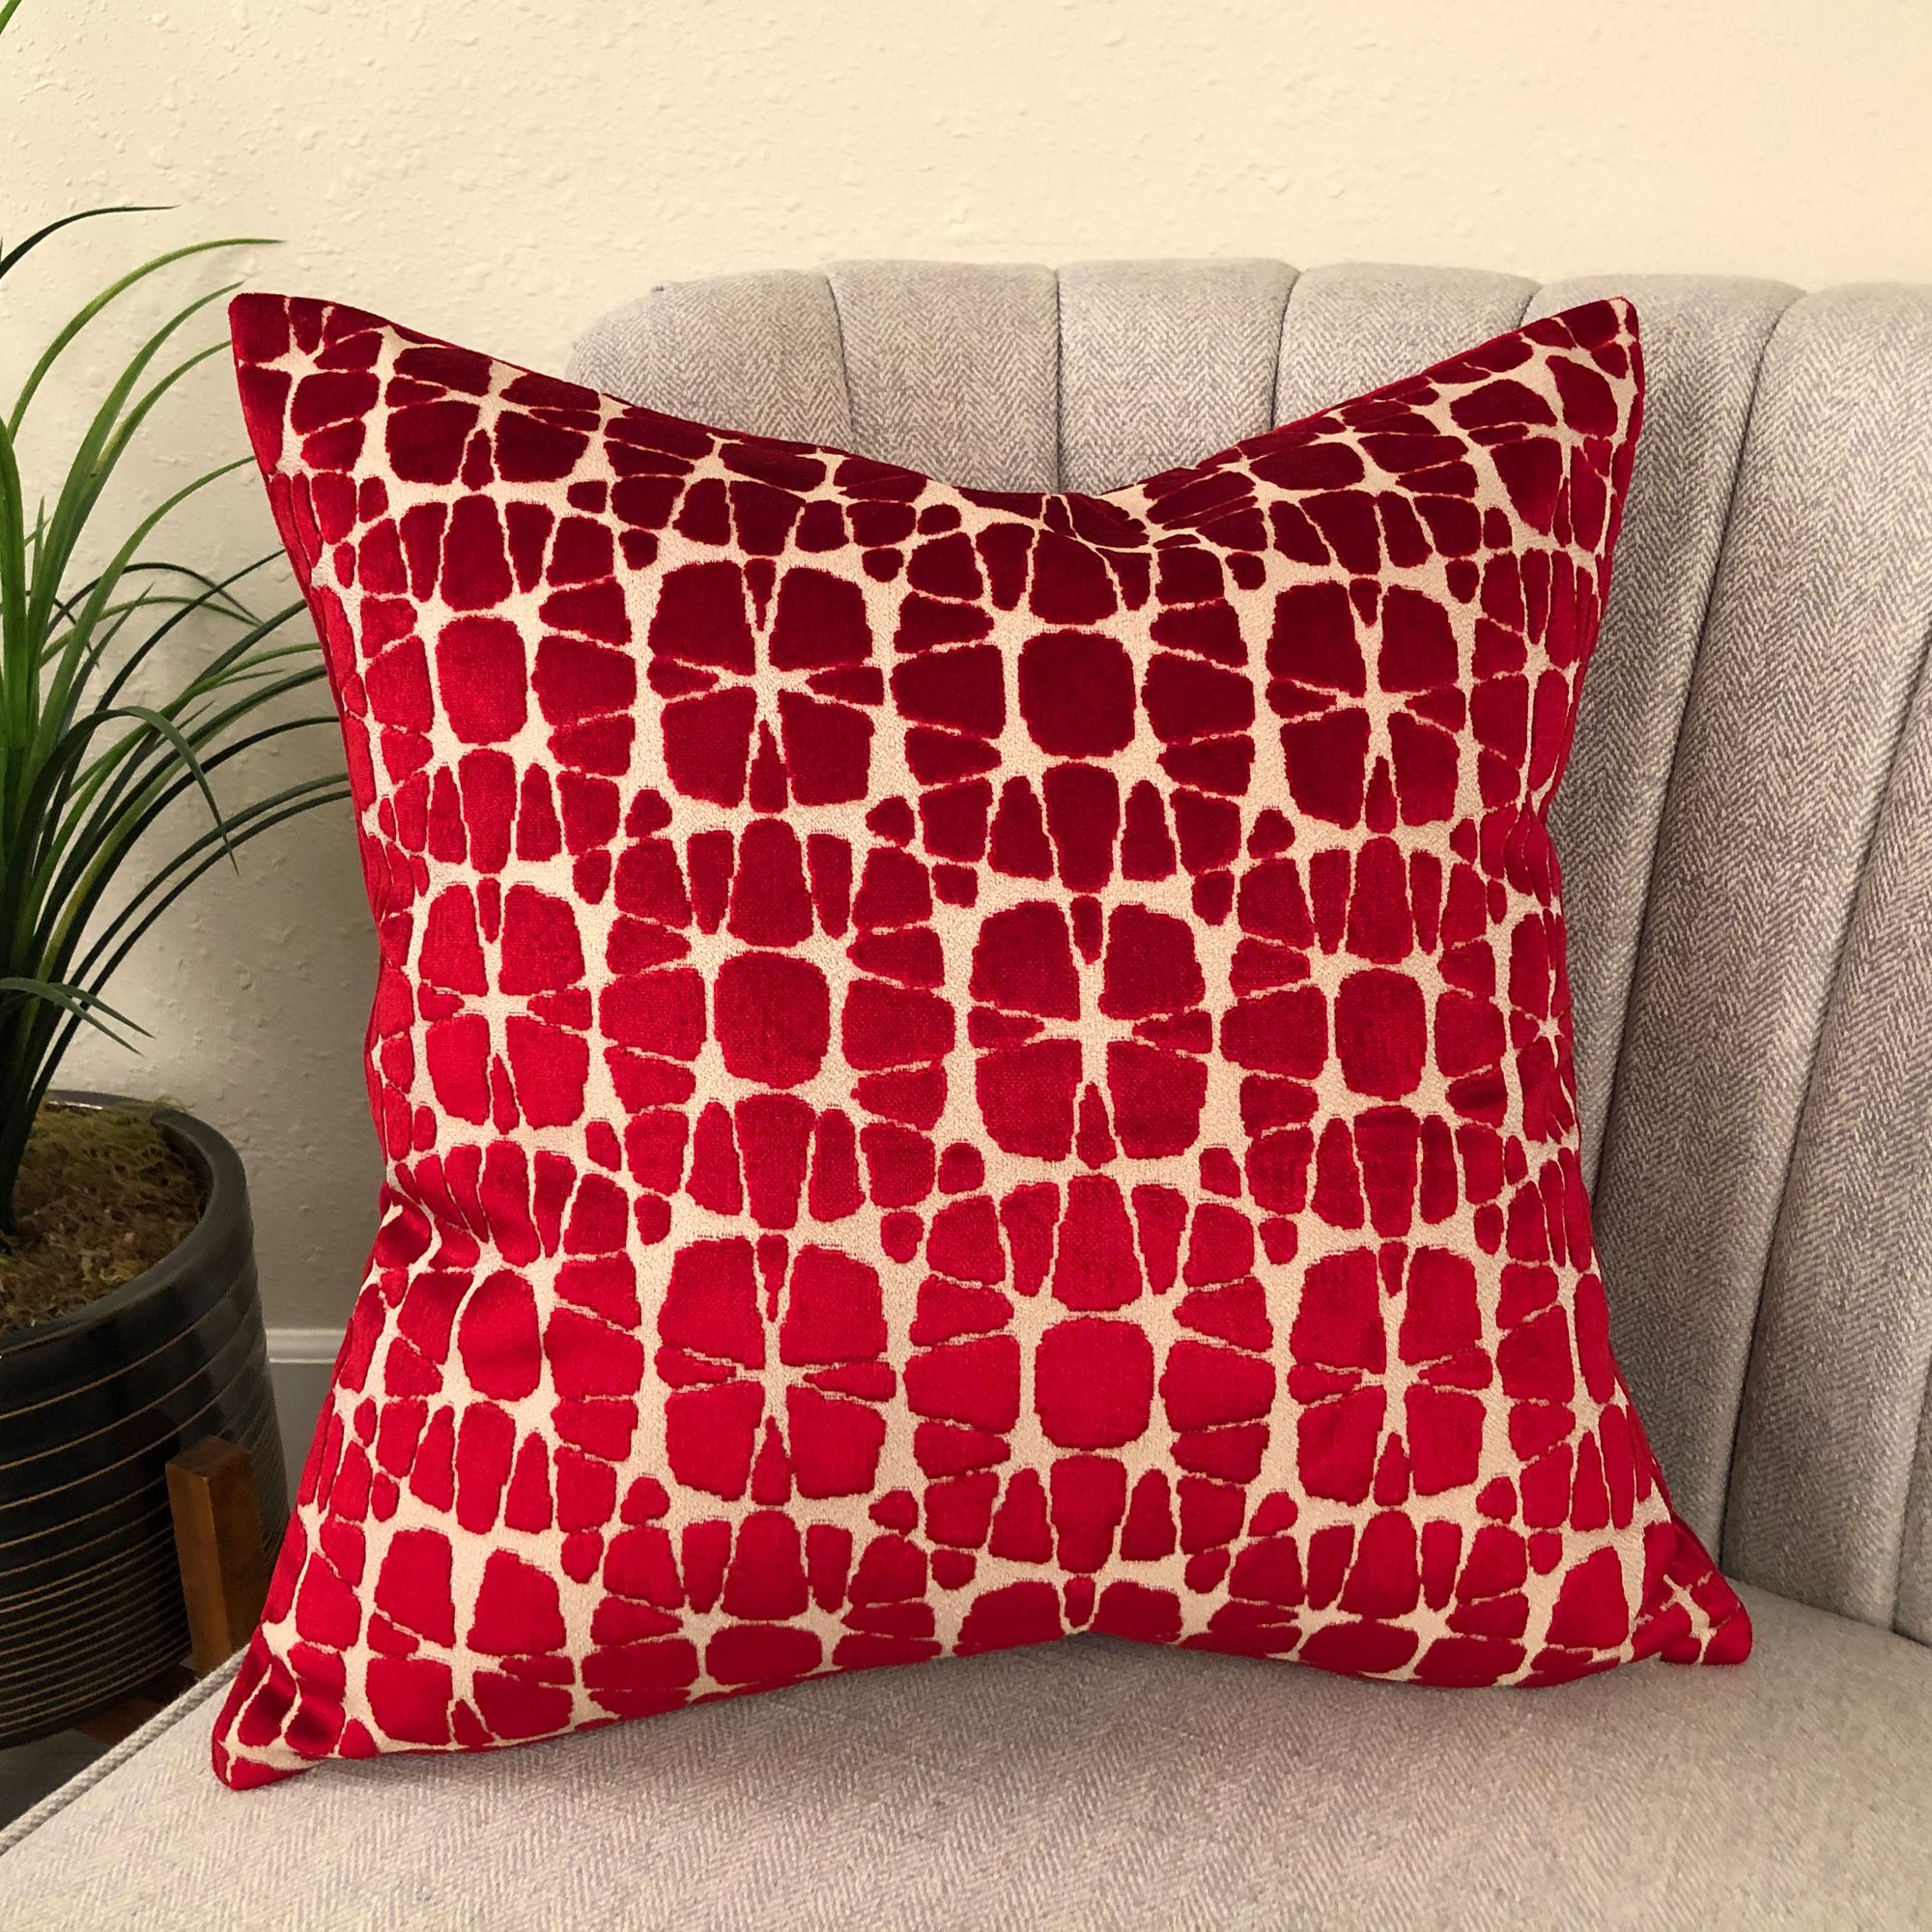 red decorative pillows